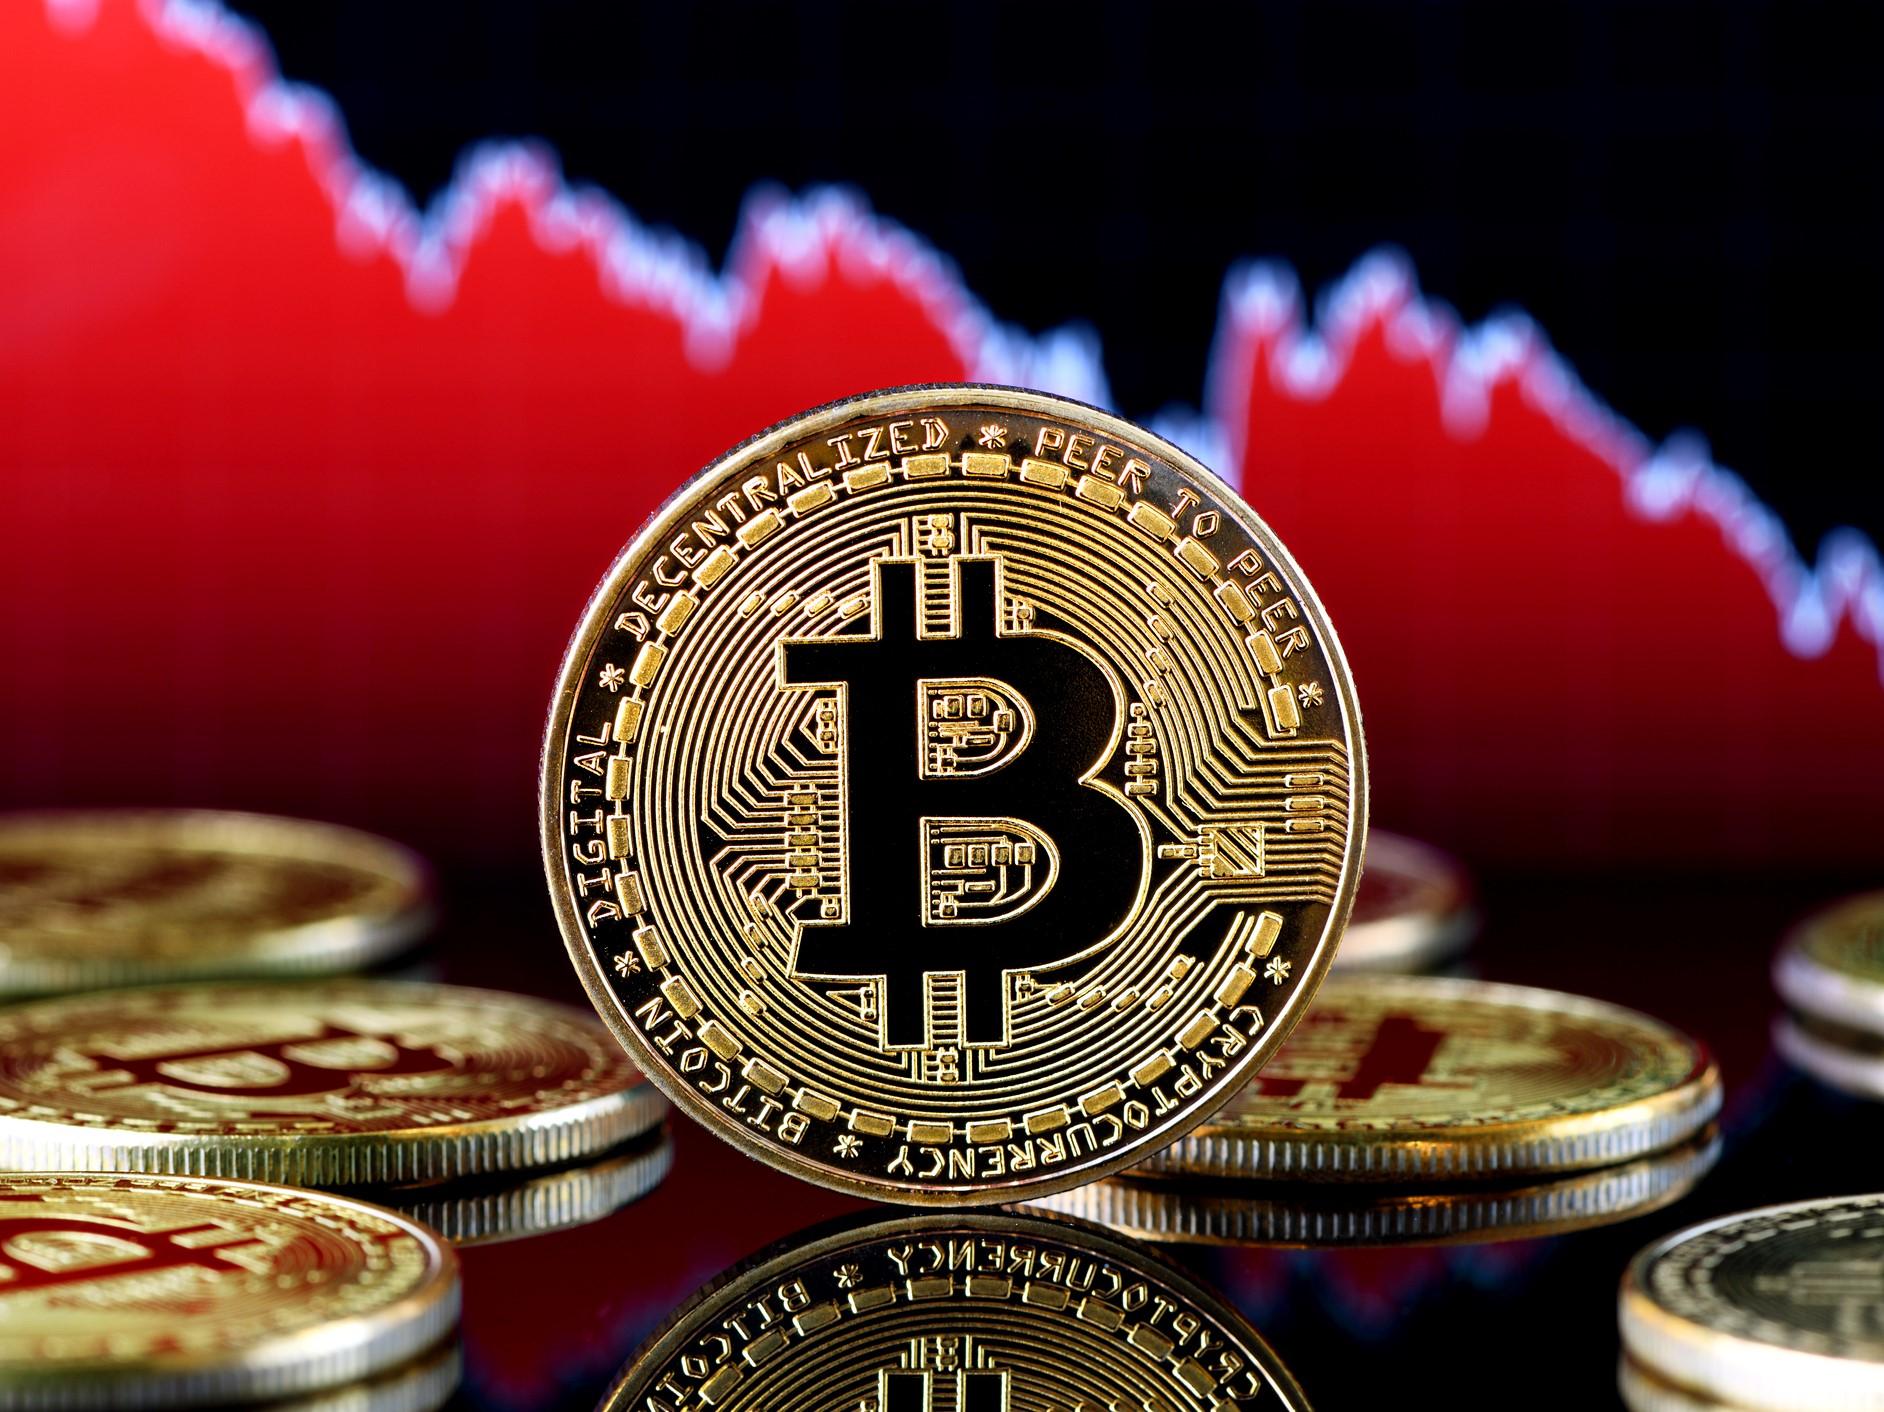 Bitcoin weakened sharply, falling in price by almost $ 3,000